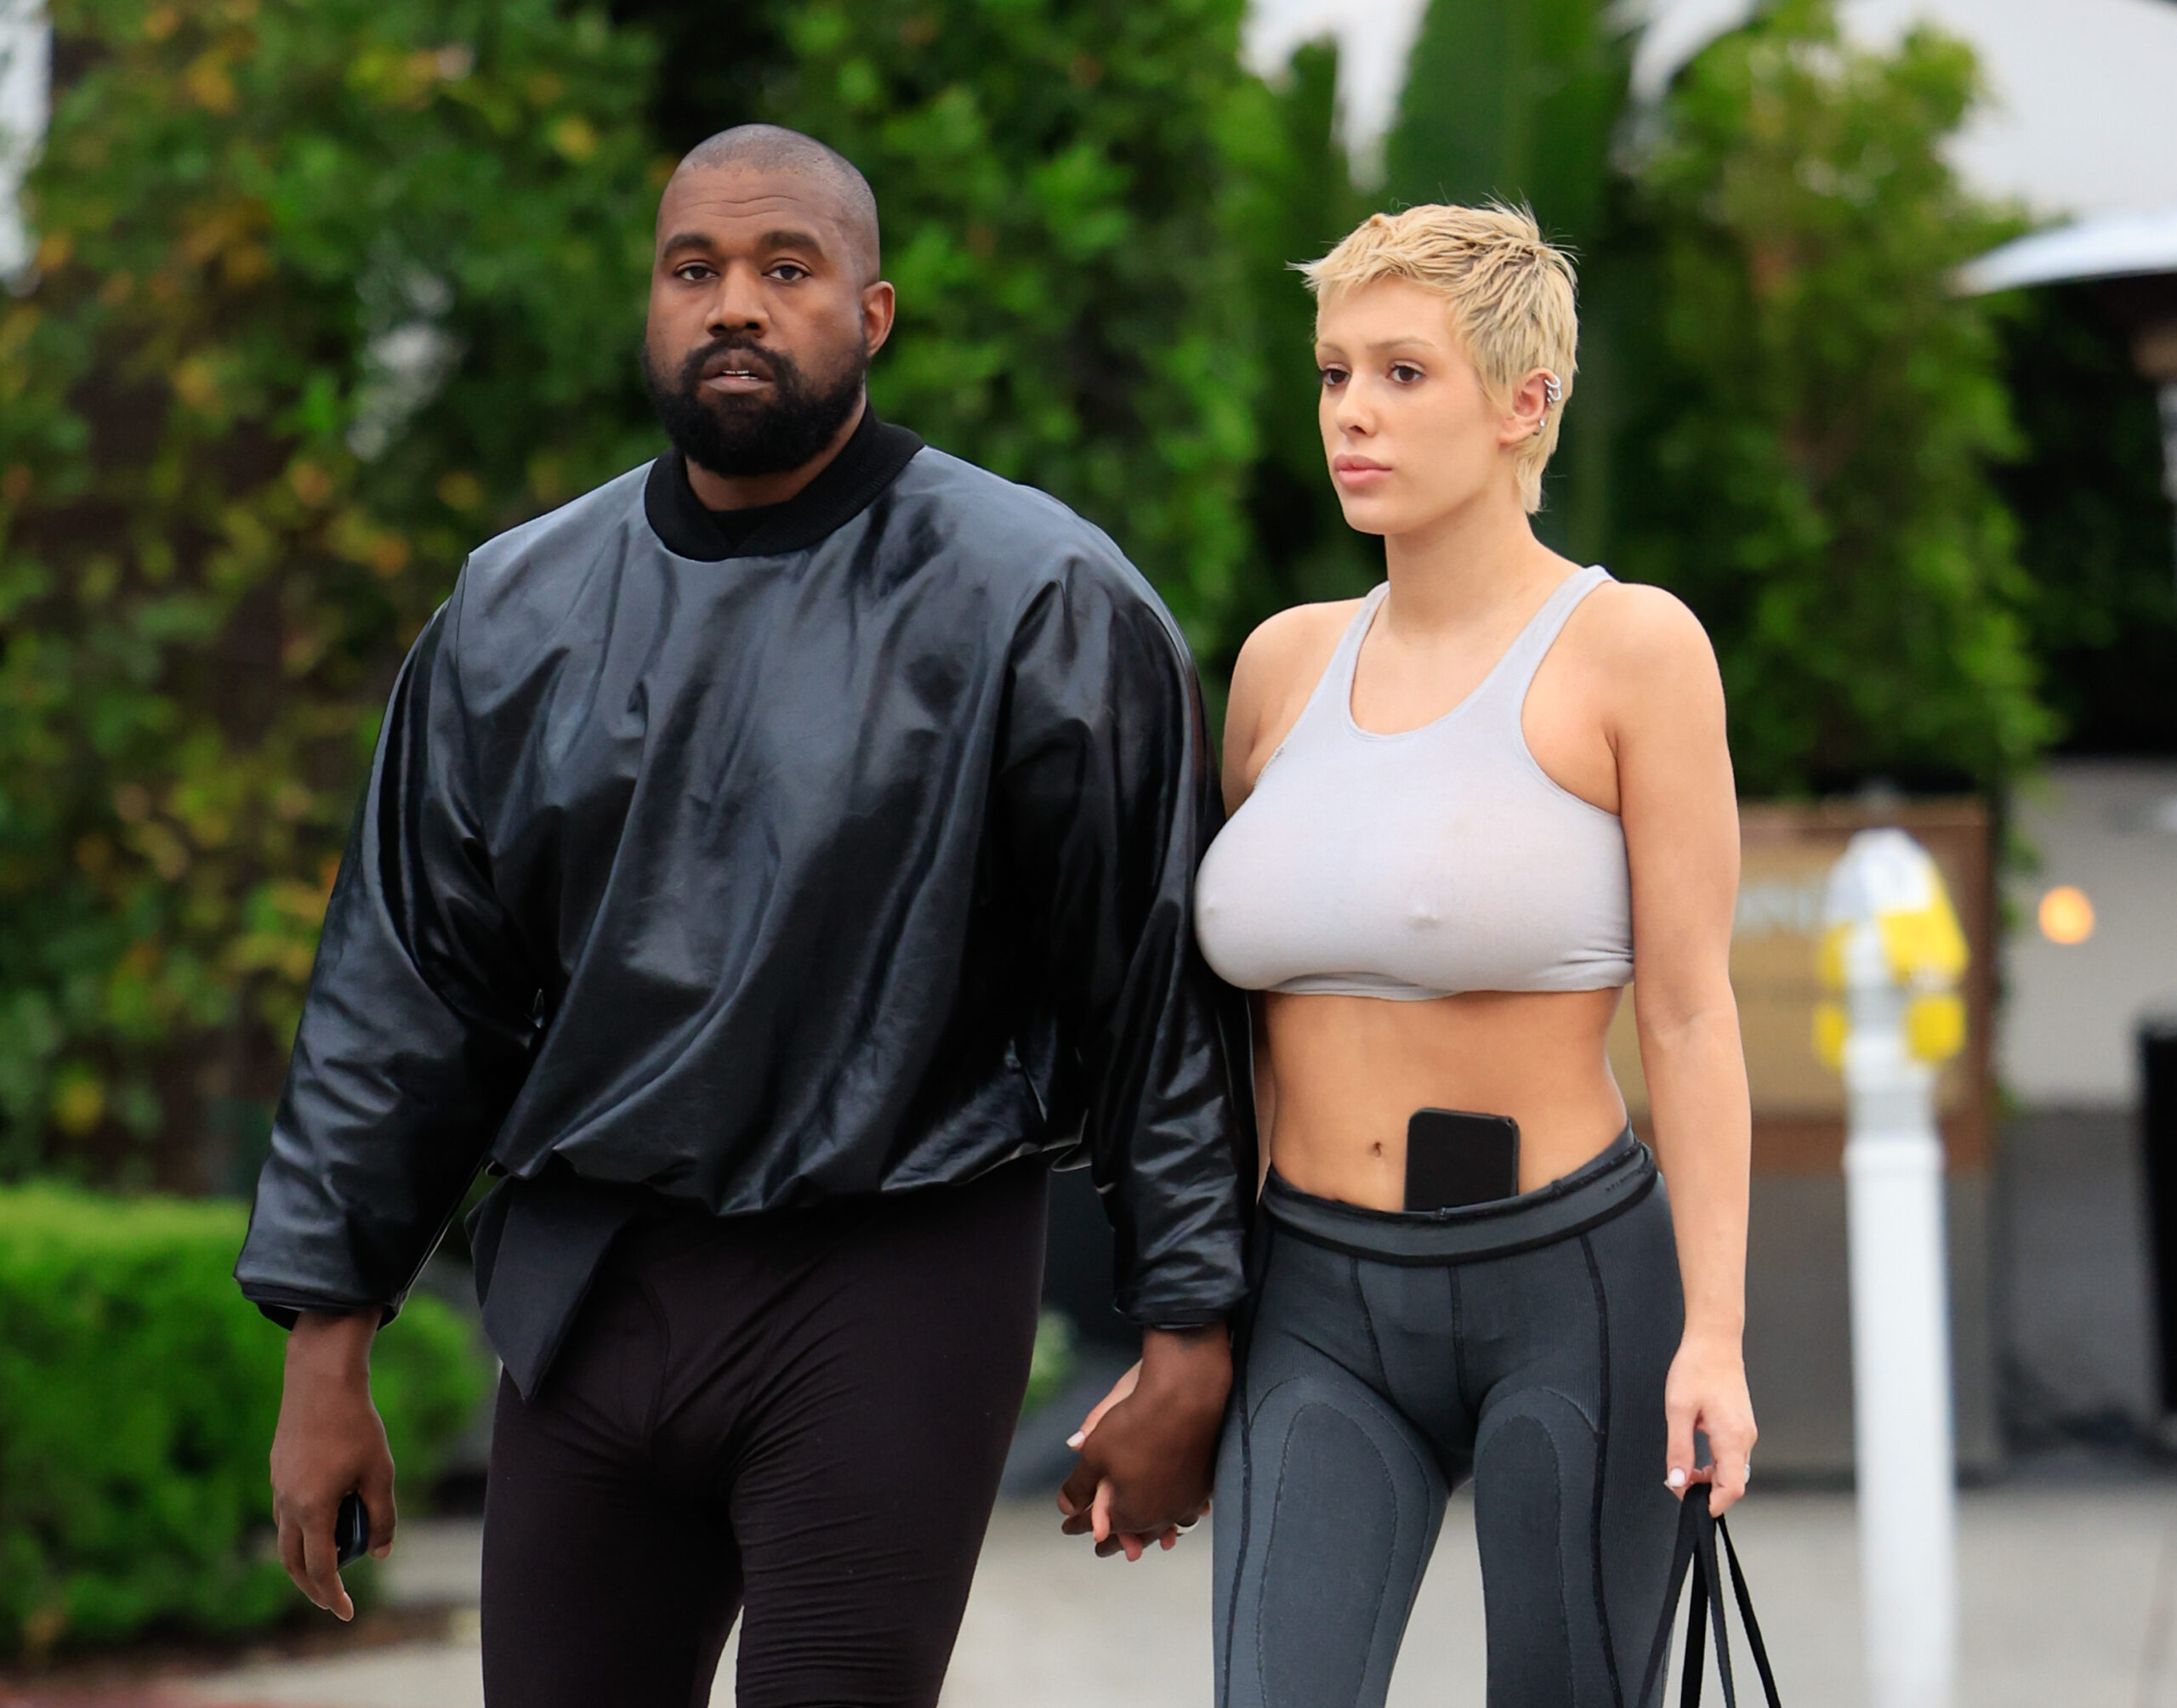 Kanye West’s wife will be fined for public indecency for walking around in a shirt that didn’t cover anything